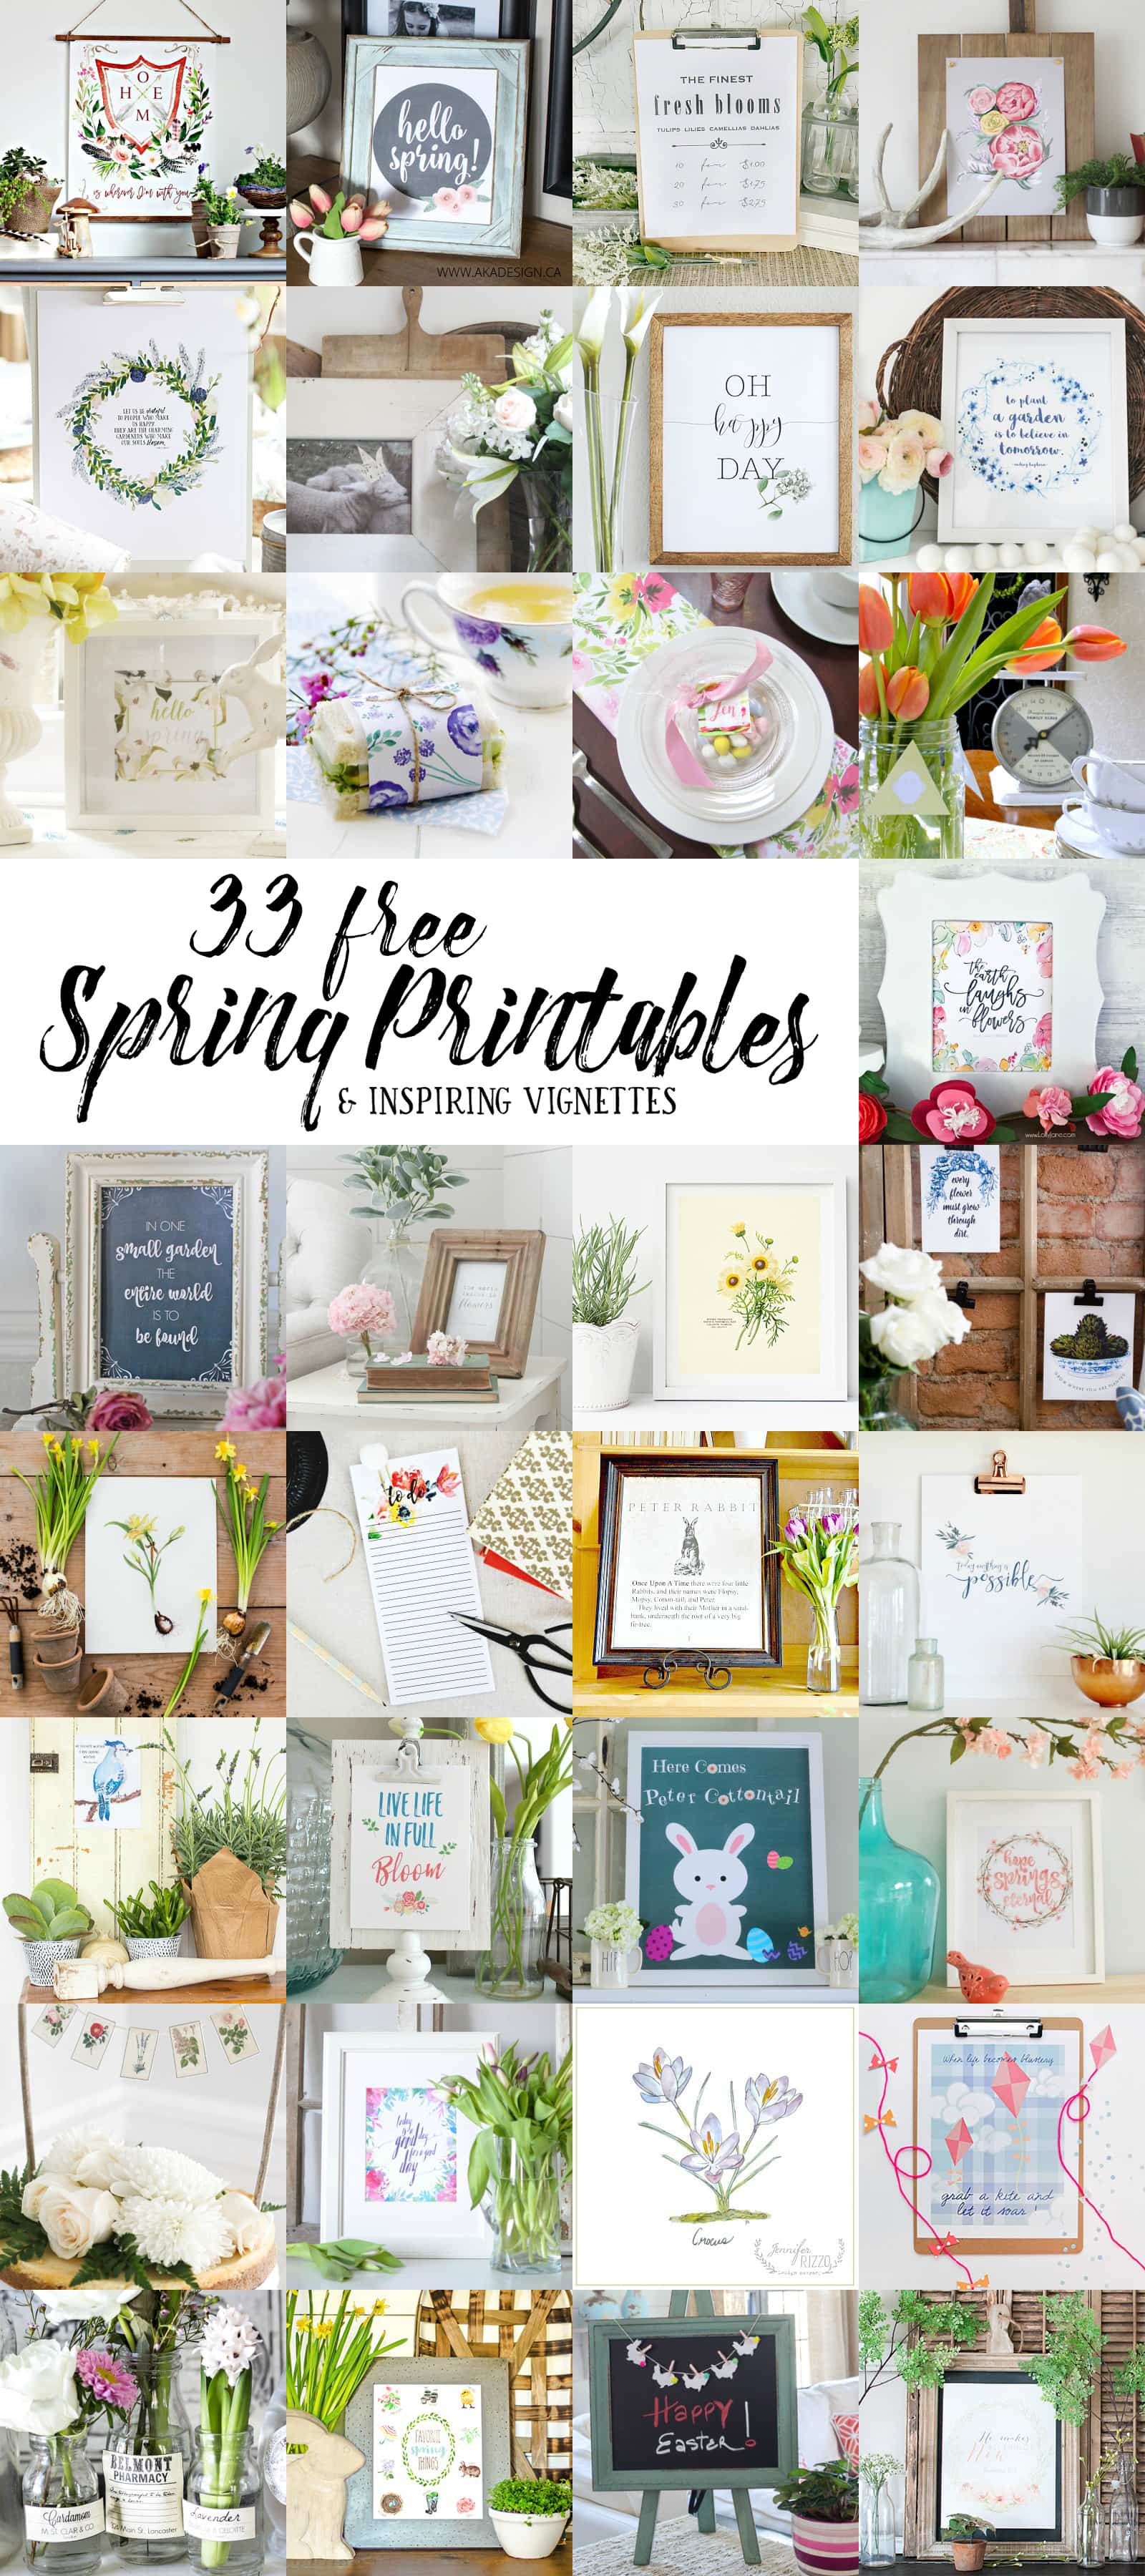 33 Free spring printables for your home and family.